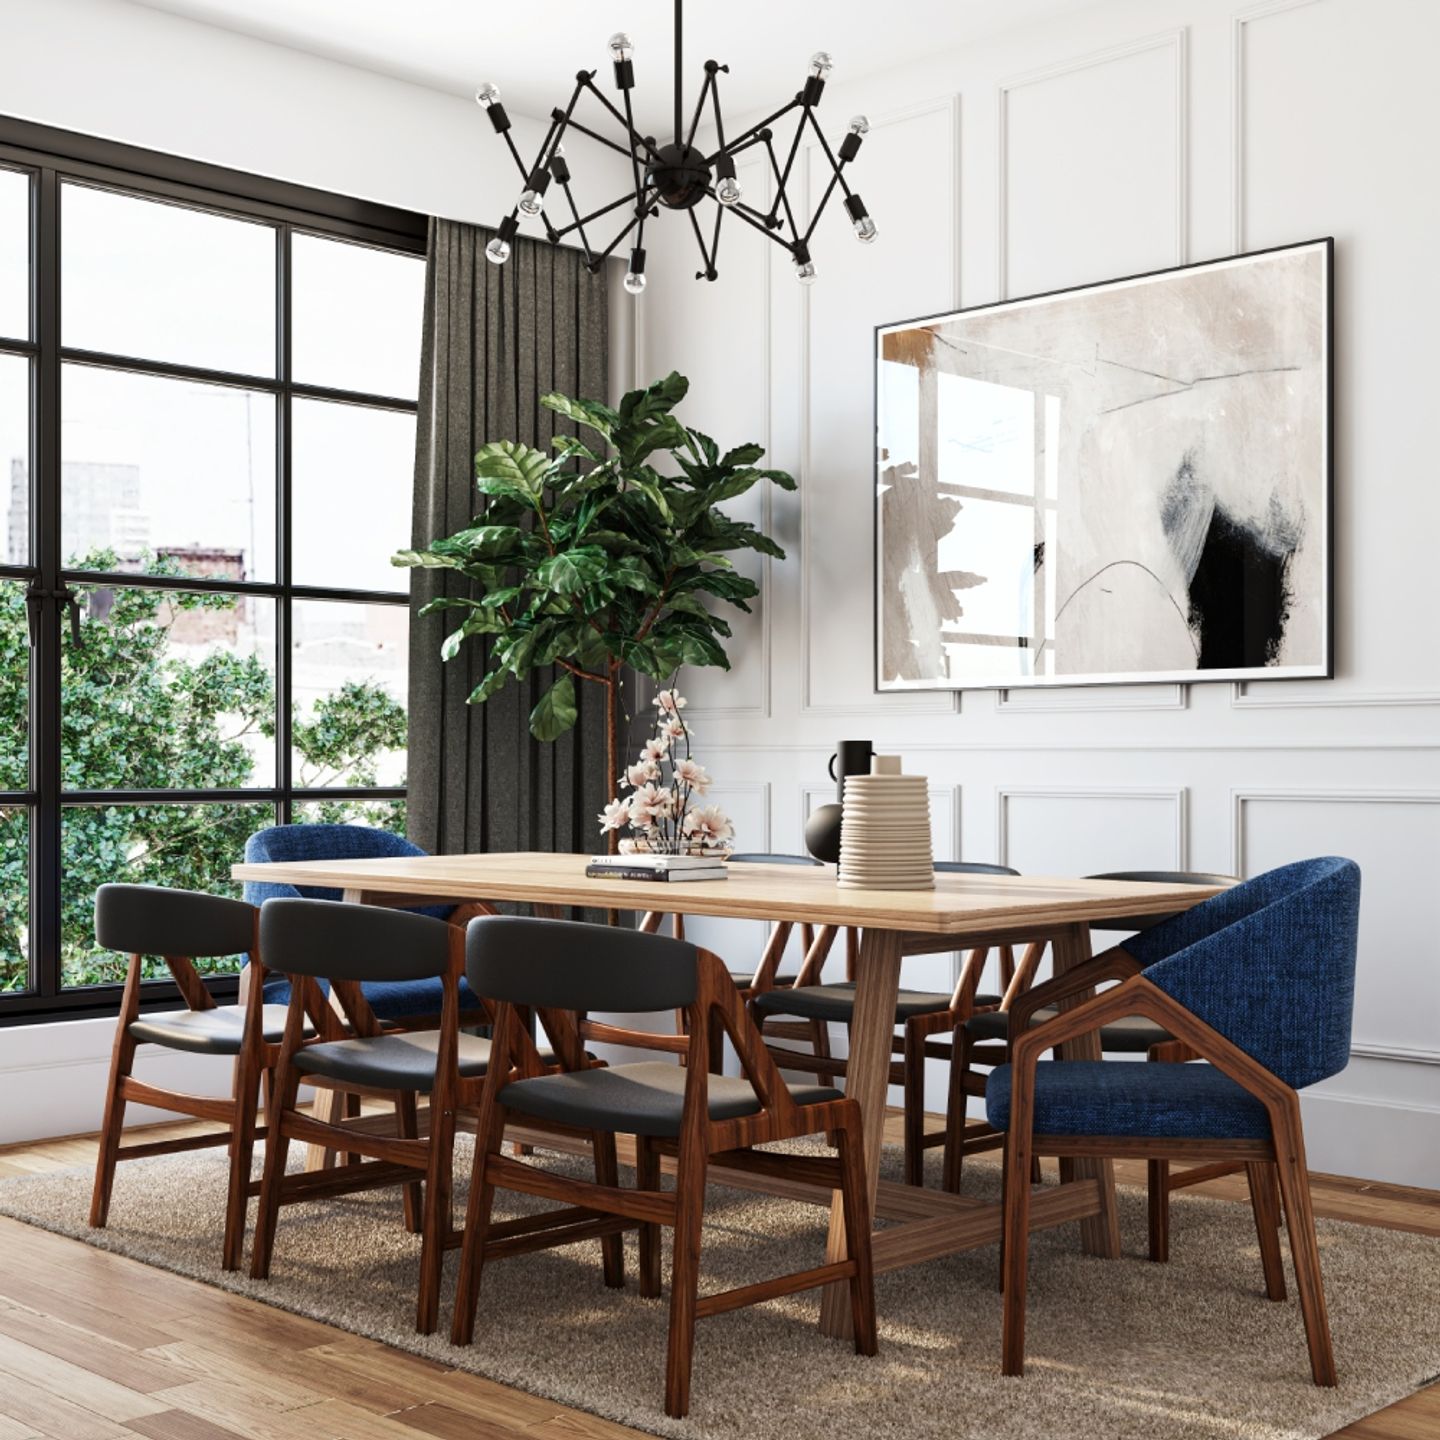 Modern 8-Seater Wooden Dining Room Design With Grey And Blue Chairs